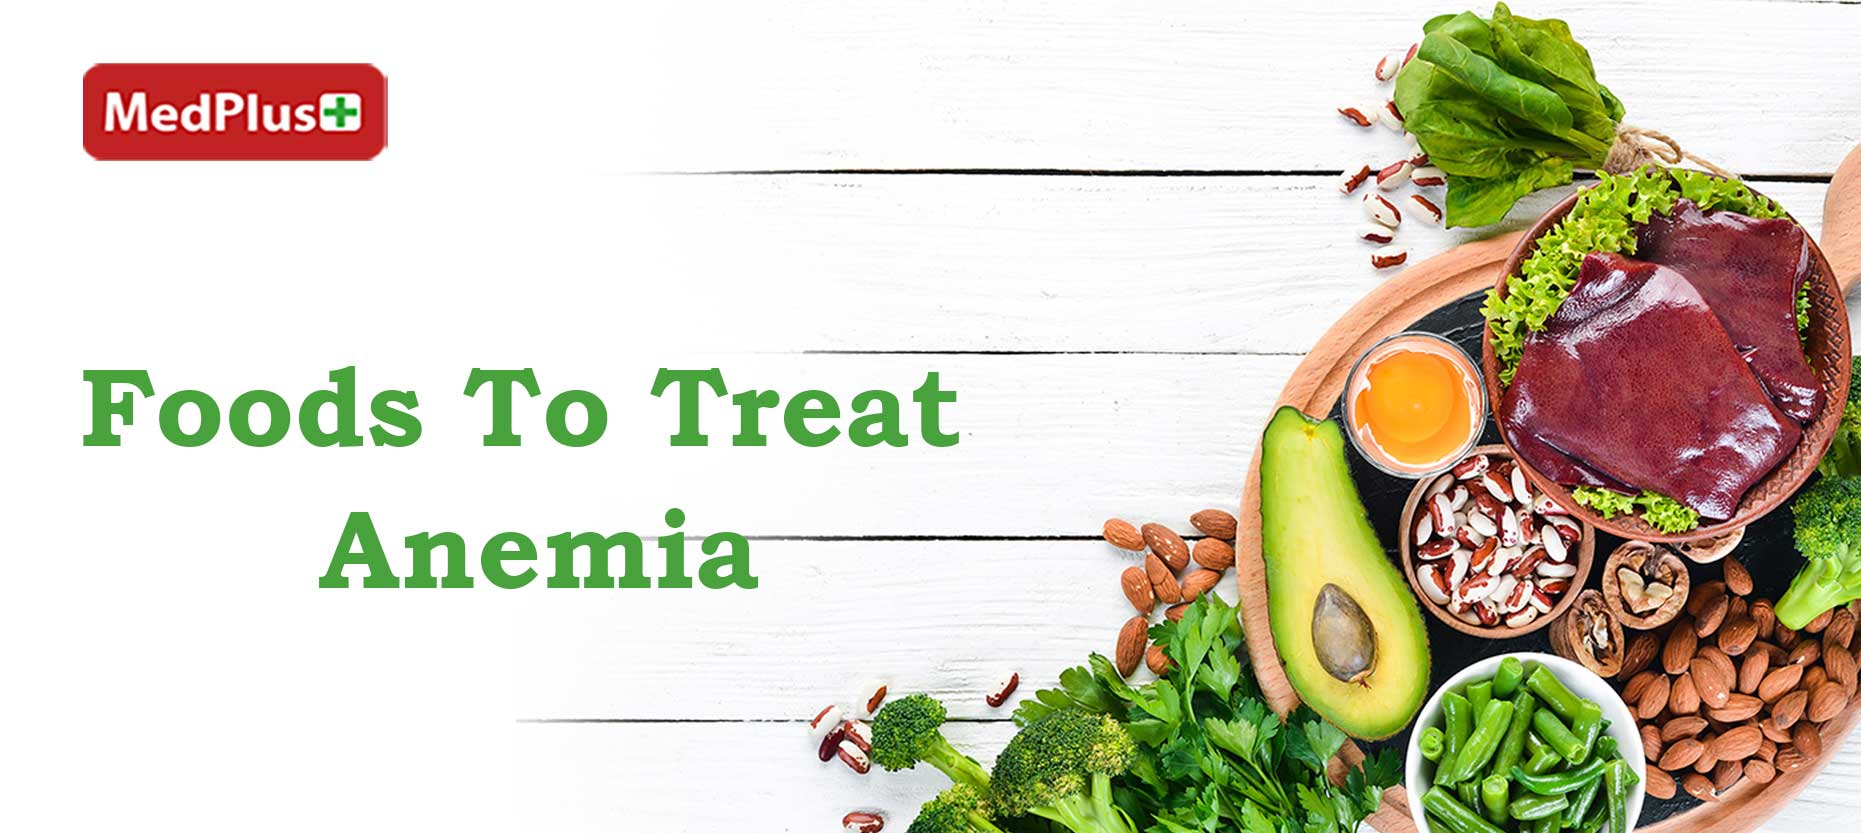 Foods to treat anemia